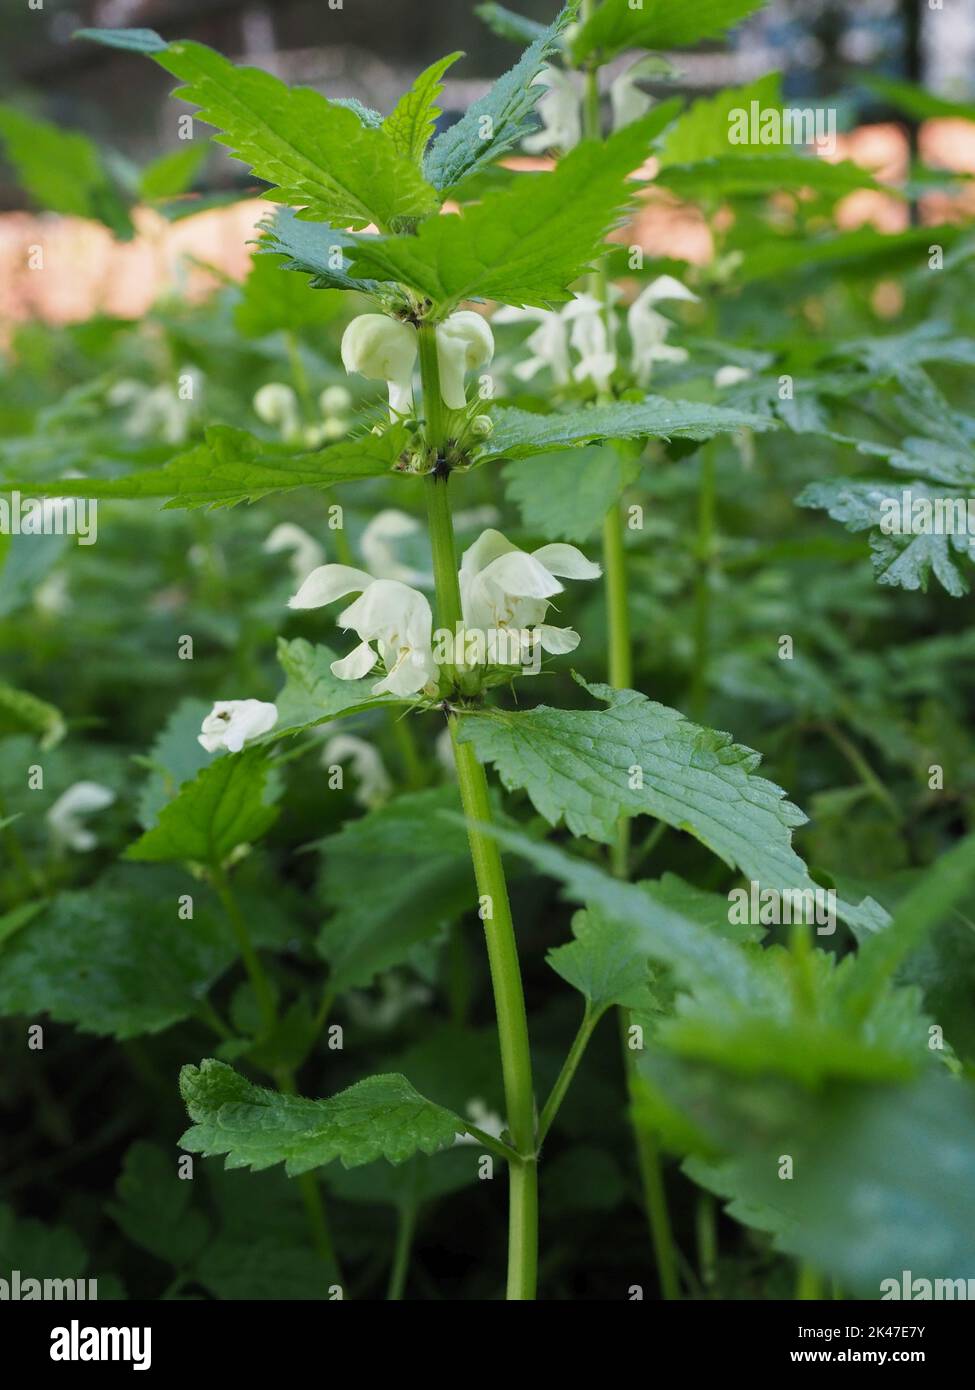 Lamium album, commonly called white nettle or white dead-nettle plant and flowers Stock Photo